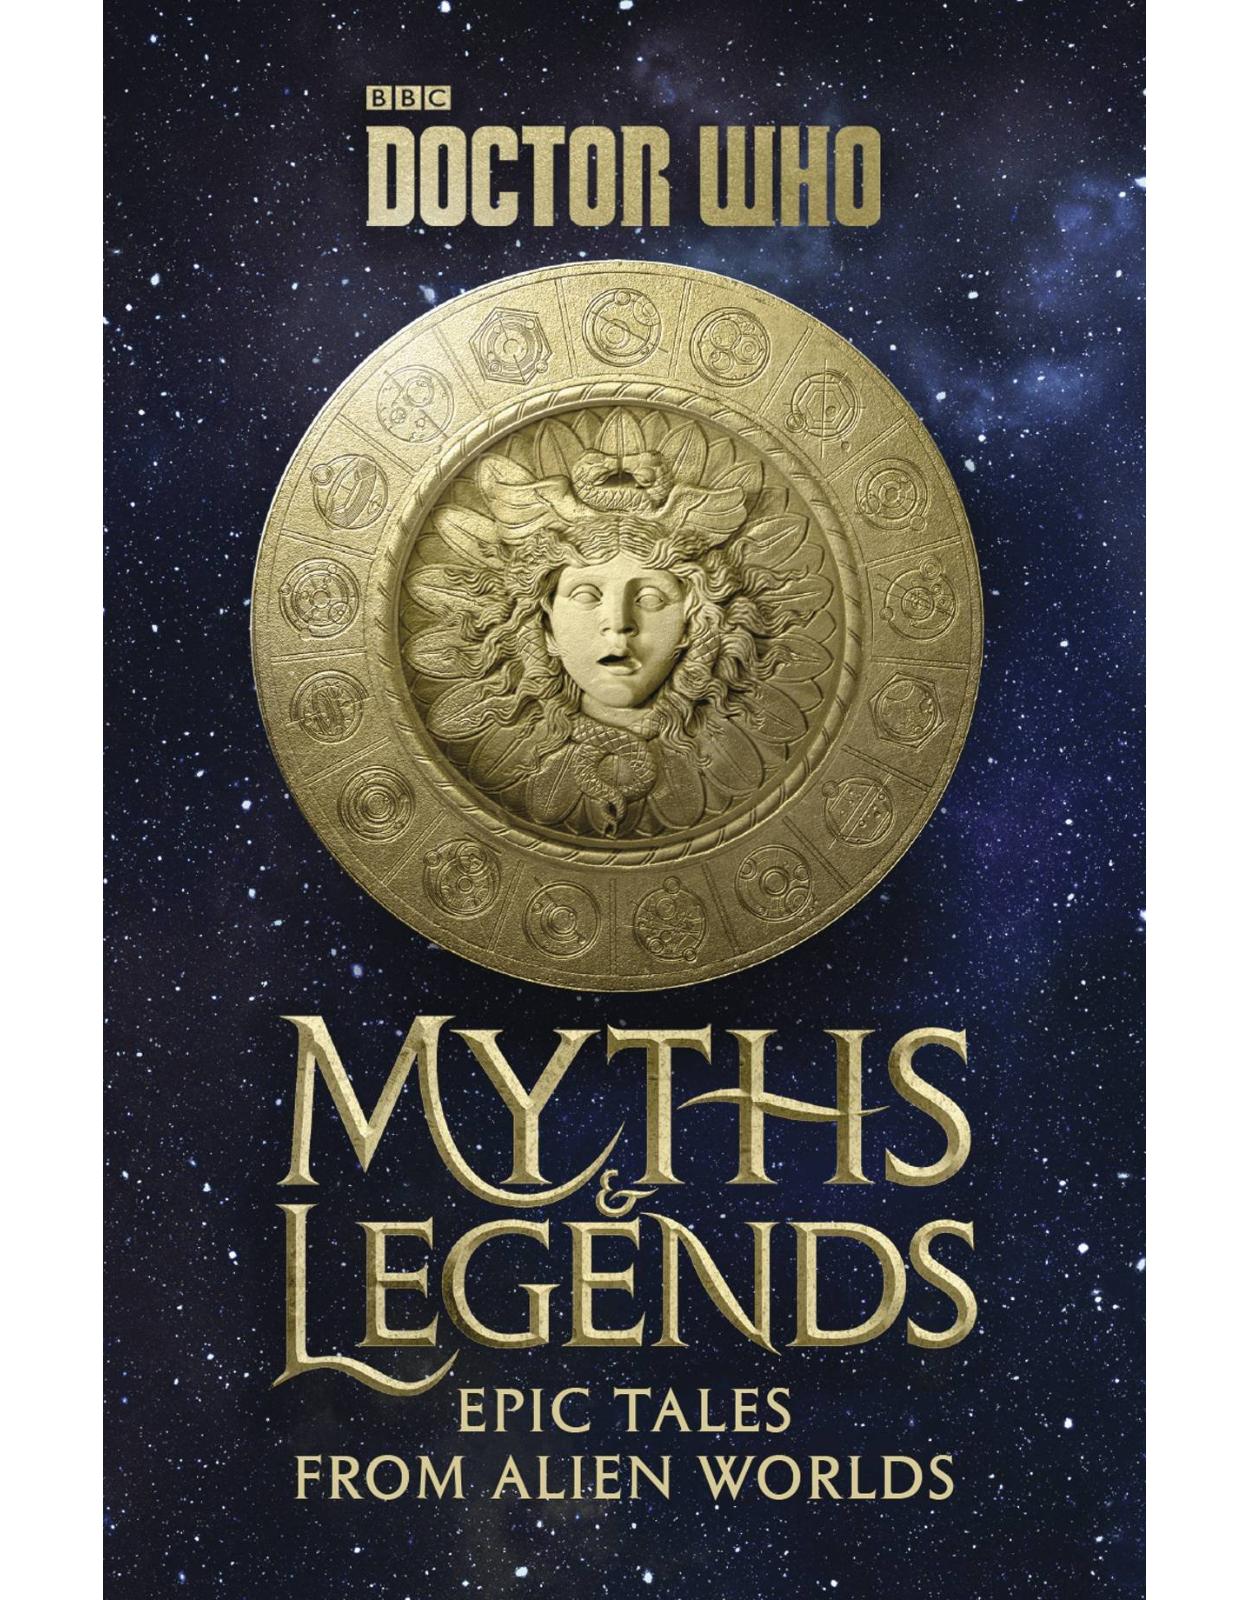 Doctor Who: Myths and Legends (Dr. Who)